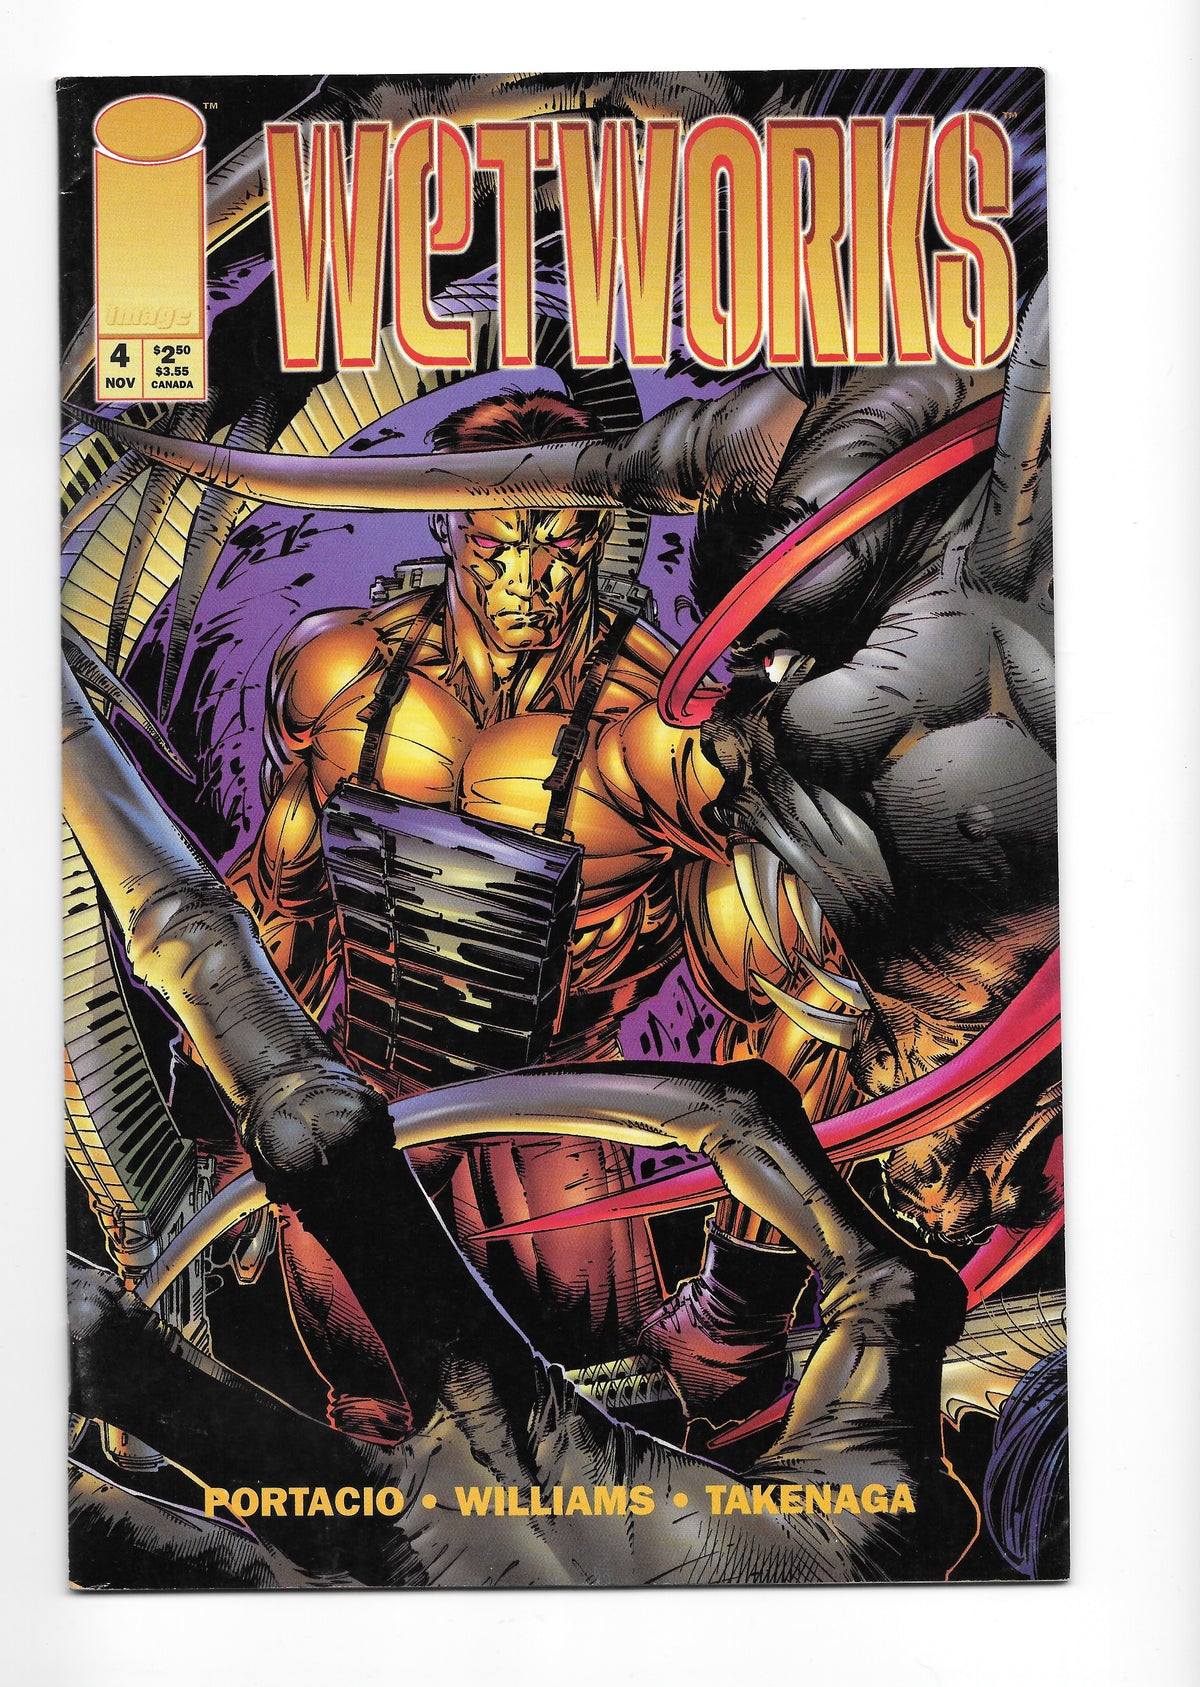 Photo of Wetworks, Vol. 1 (1994)  Iss 4 Very Fine  Comic sold by Stronghold Collectibles